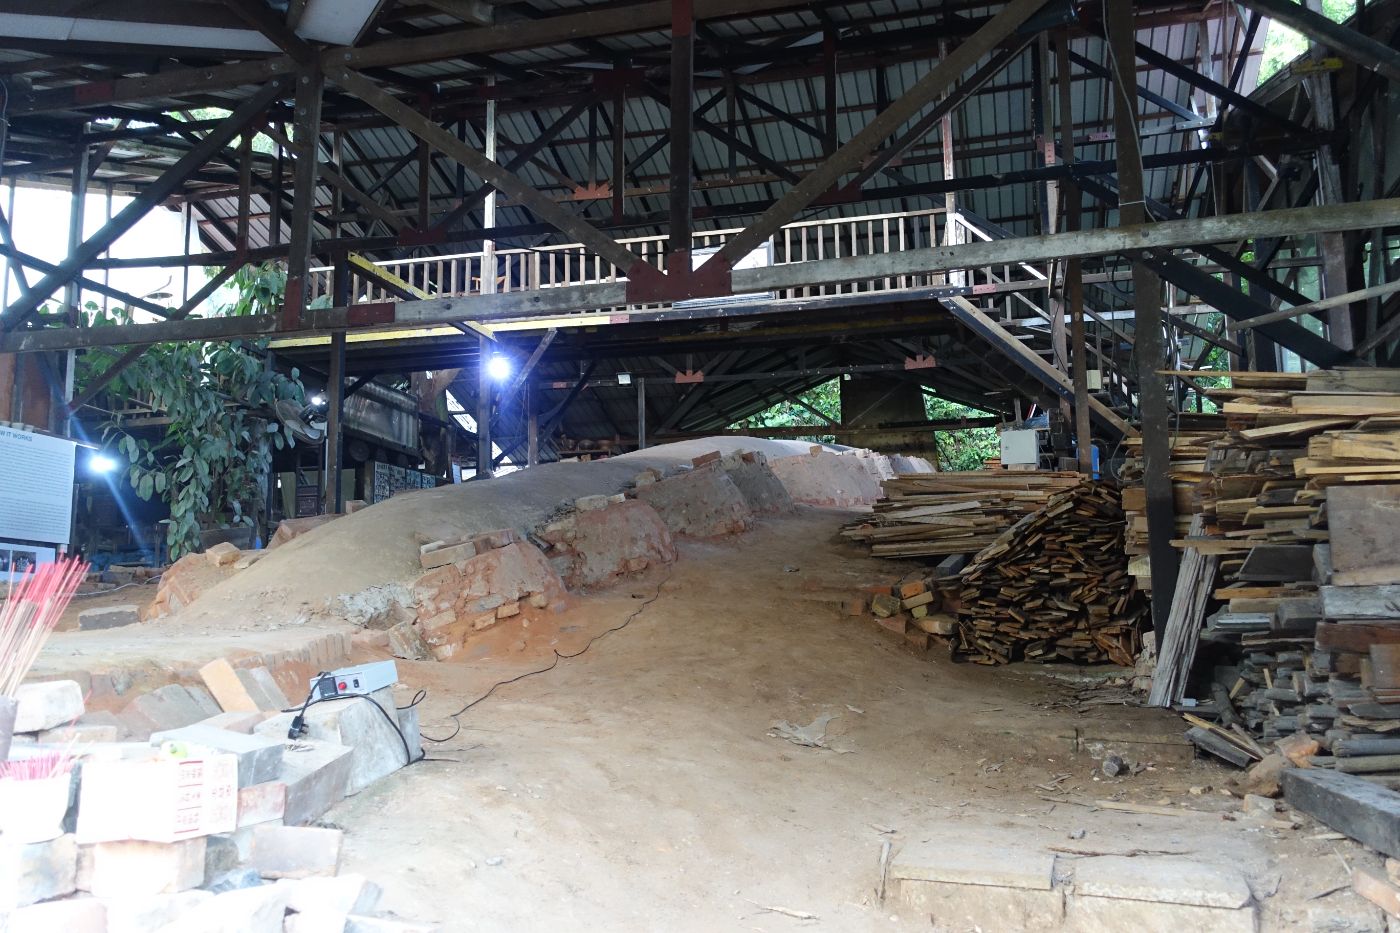 A dragon kiln comprises a long firing chamber built on a slope with many stoke holes on the side.  Shown here is the Thow Kwang Dragon Kiln, the only functioning dragon kiln in Singapore today.